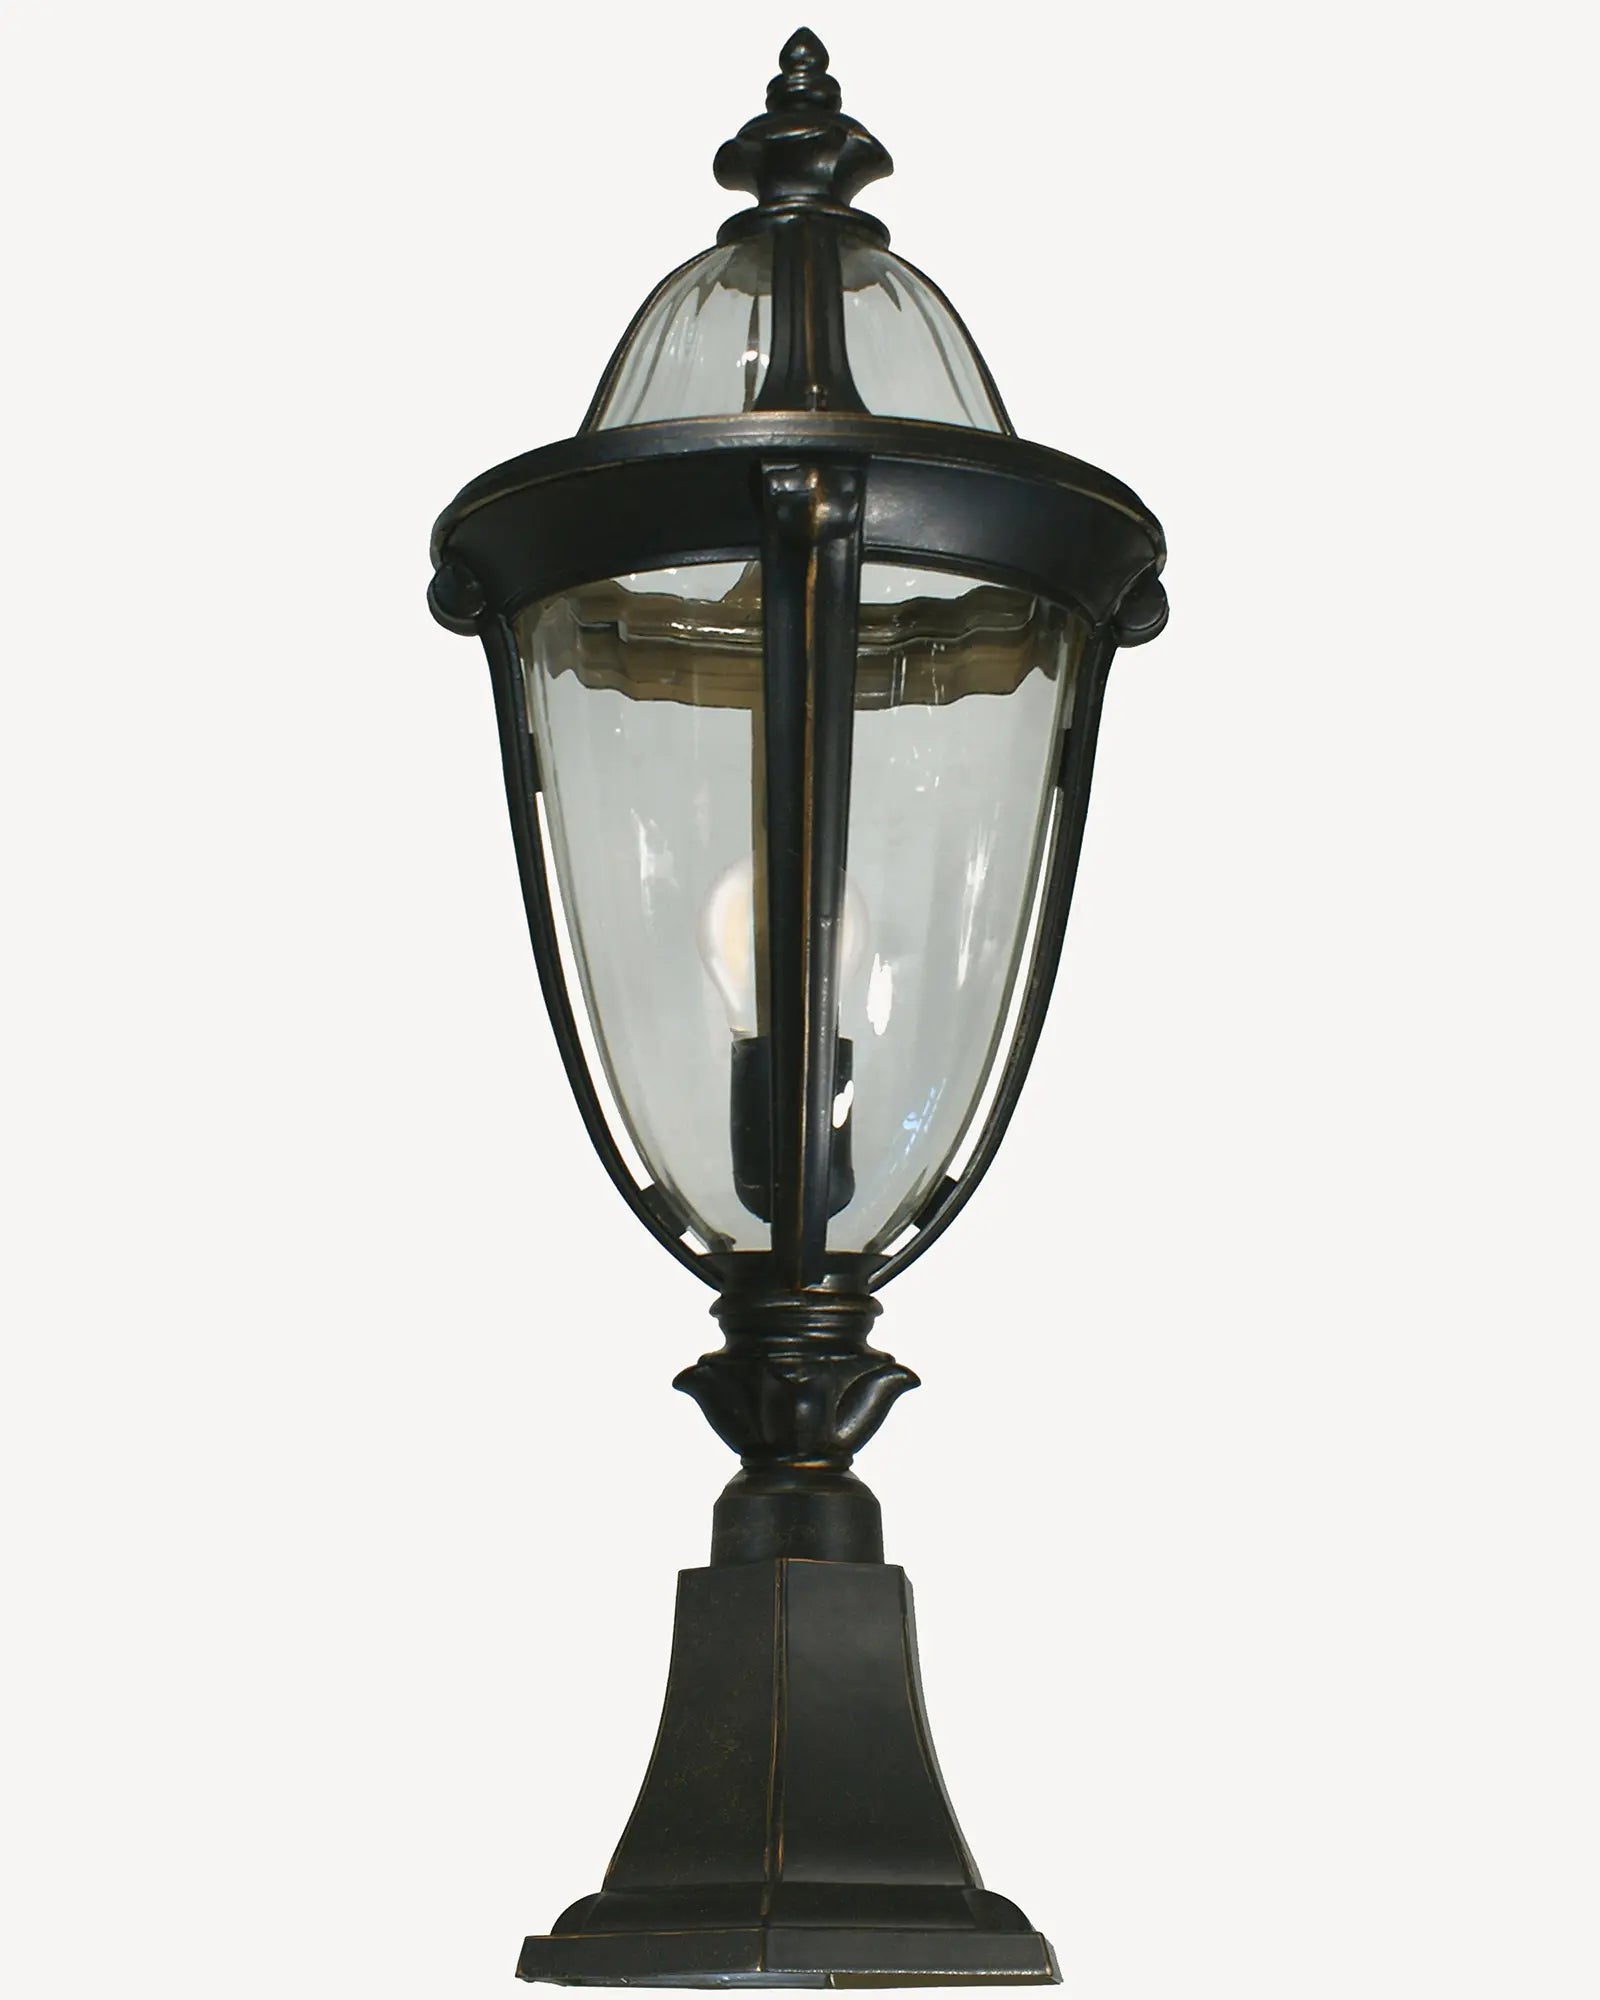 Mayfair pedestal light by Inspiration Light at Nook Collections